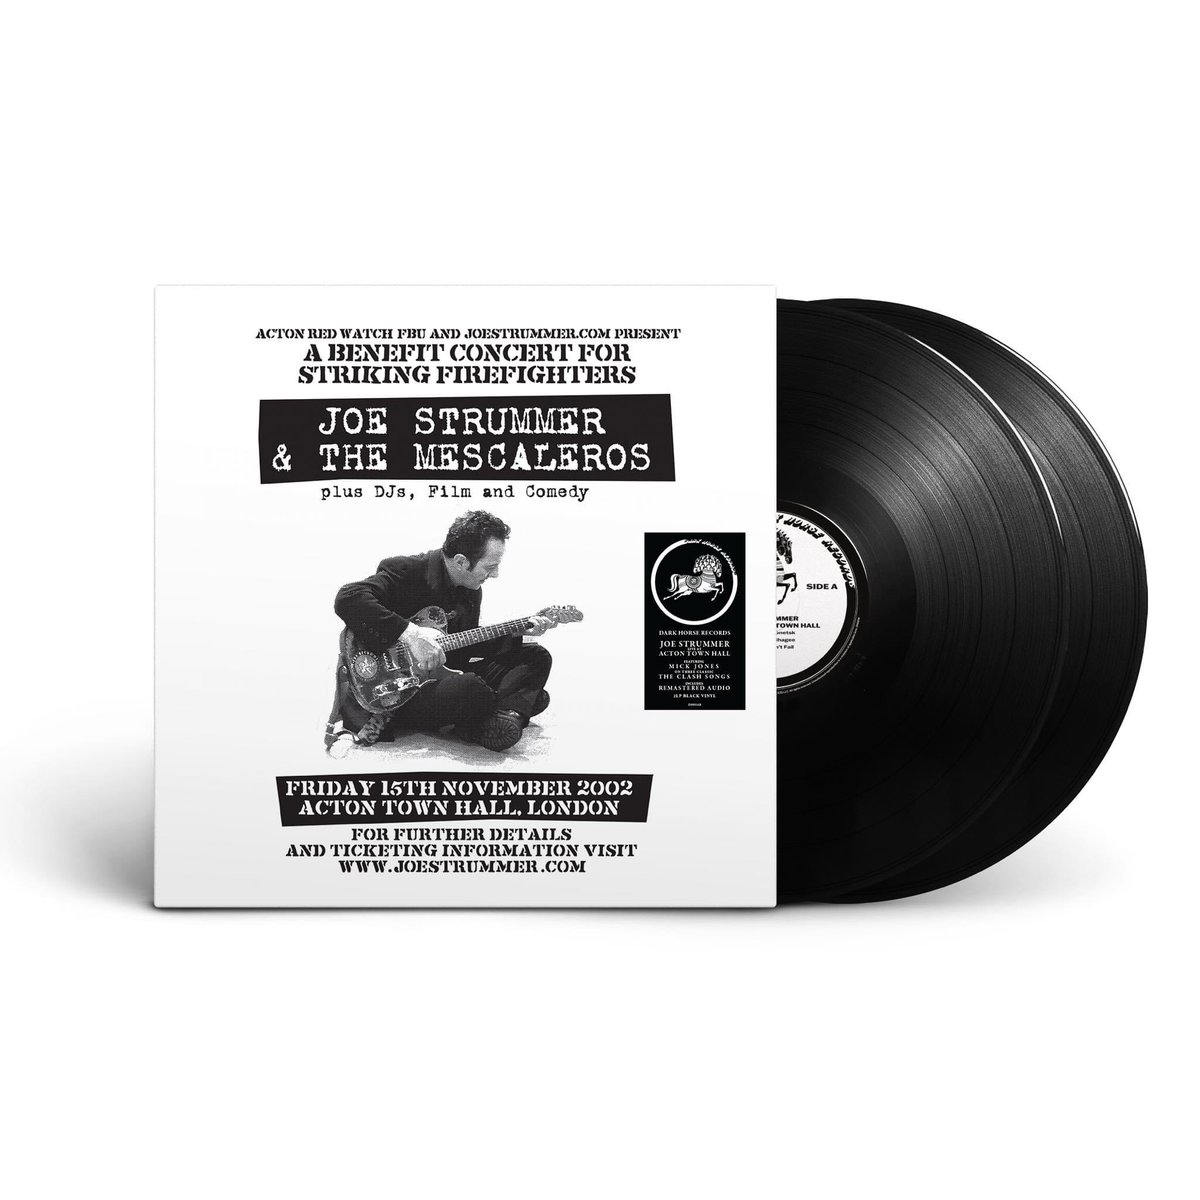 LIVE AT ACTON TOWN HALL - @JoeStrummer’s iconic London benefit show for striking firefighters - has been reissued on 2LP black vinyl and is available now via @darkhorserecs‼️ Go here - darkhorserecords.lnk.to/liveatactonvin… - to find out more ✊️